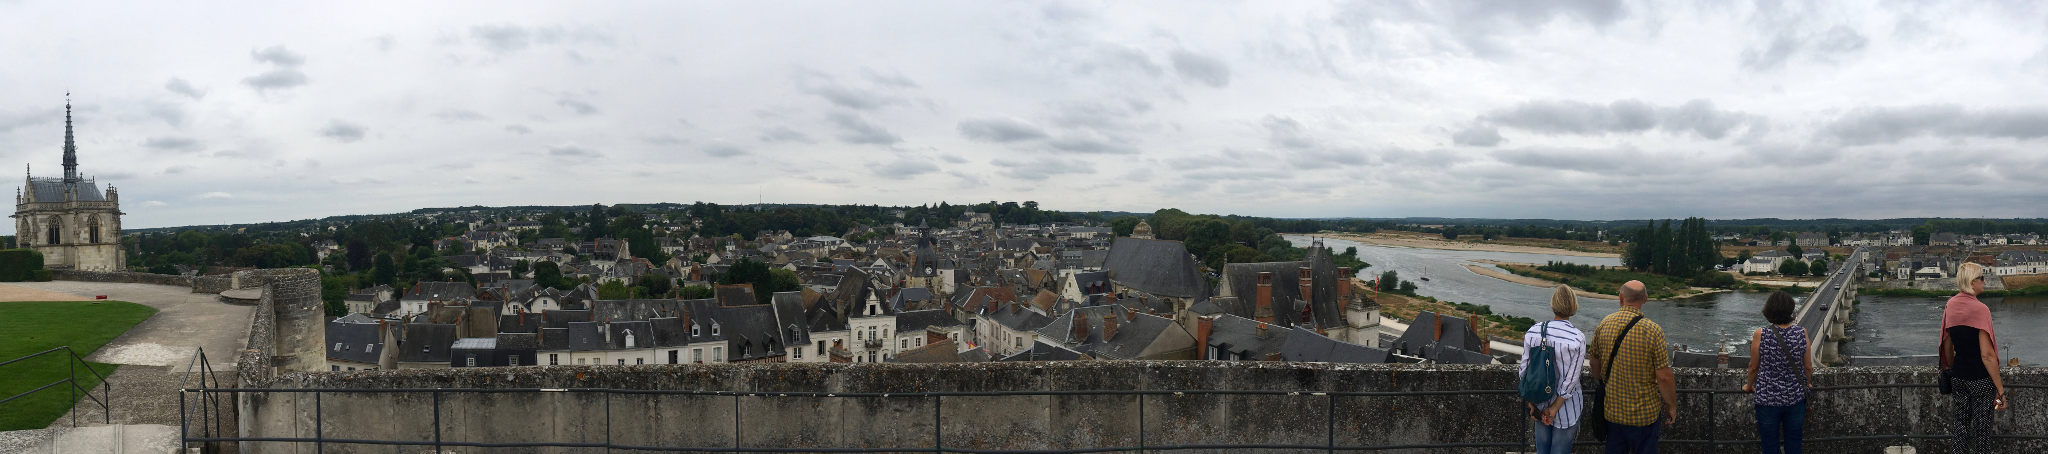 The View From The Chateau looking out across the rooftops